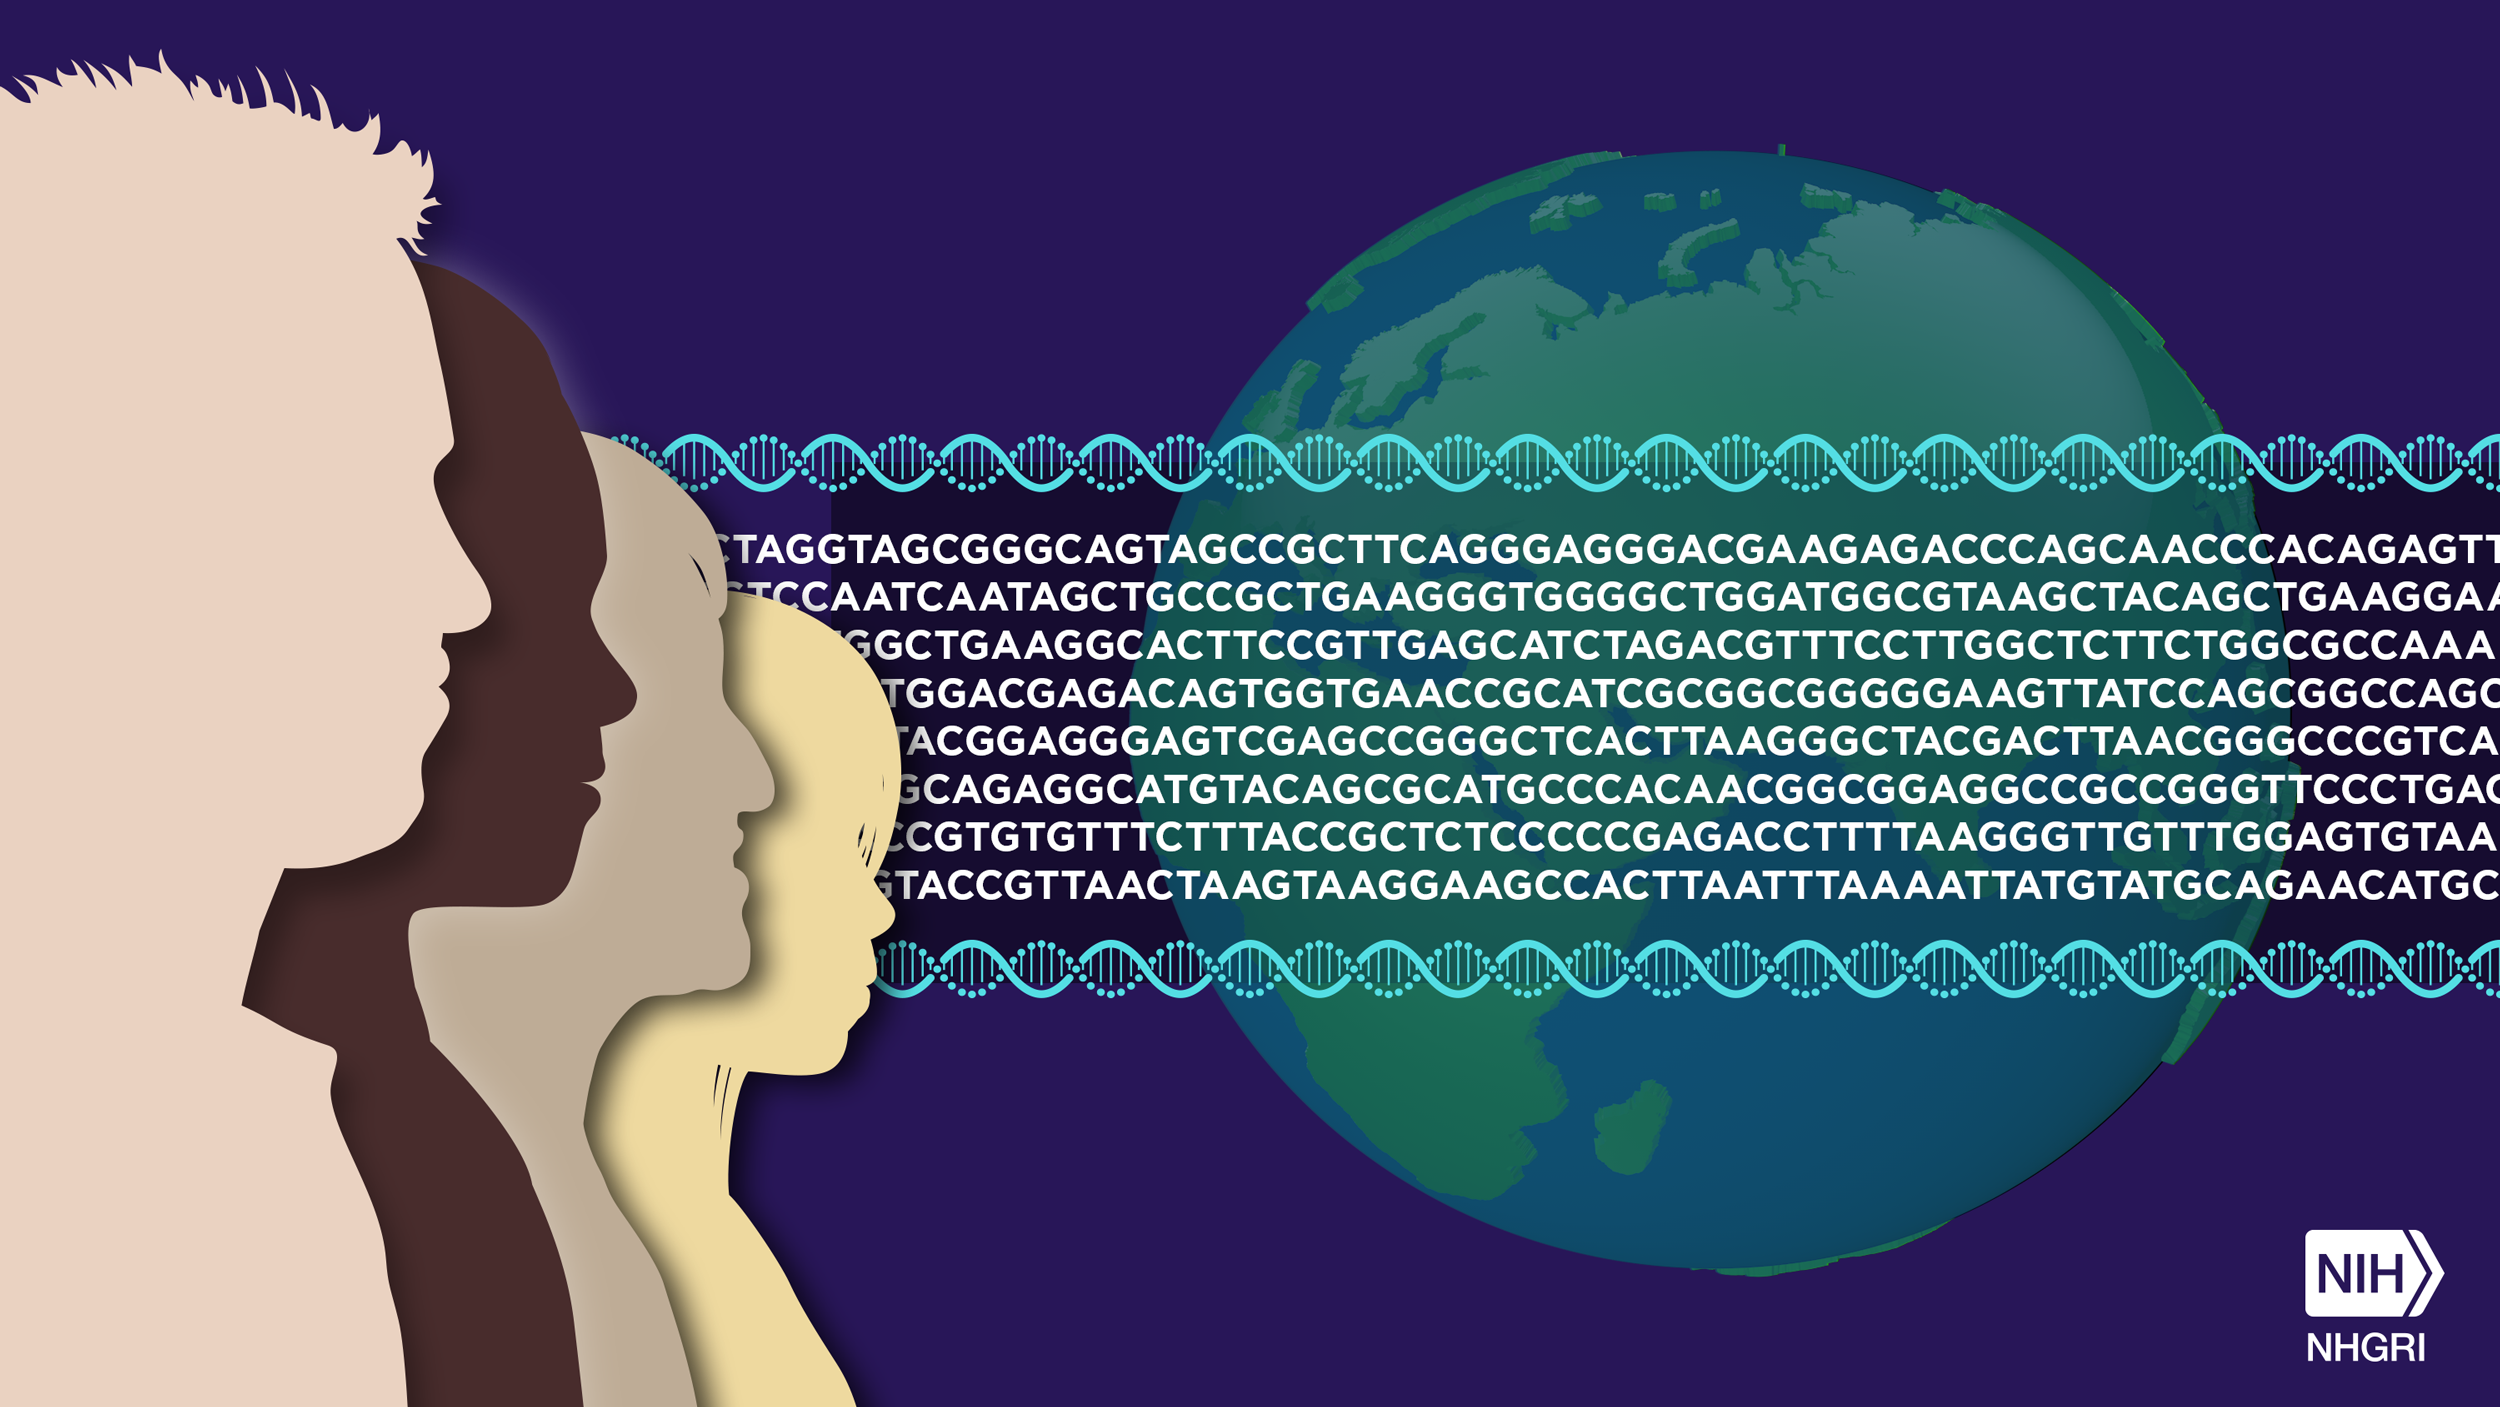 Silhouettes of 4 people layered on the left, chunk of genetic code in between 2 DNA helices overlapping a graphic of Earth